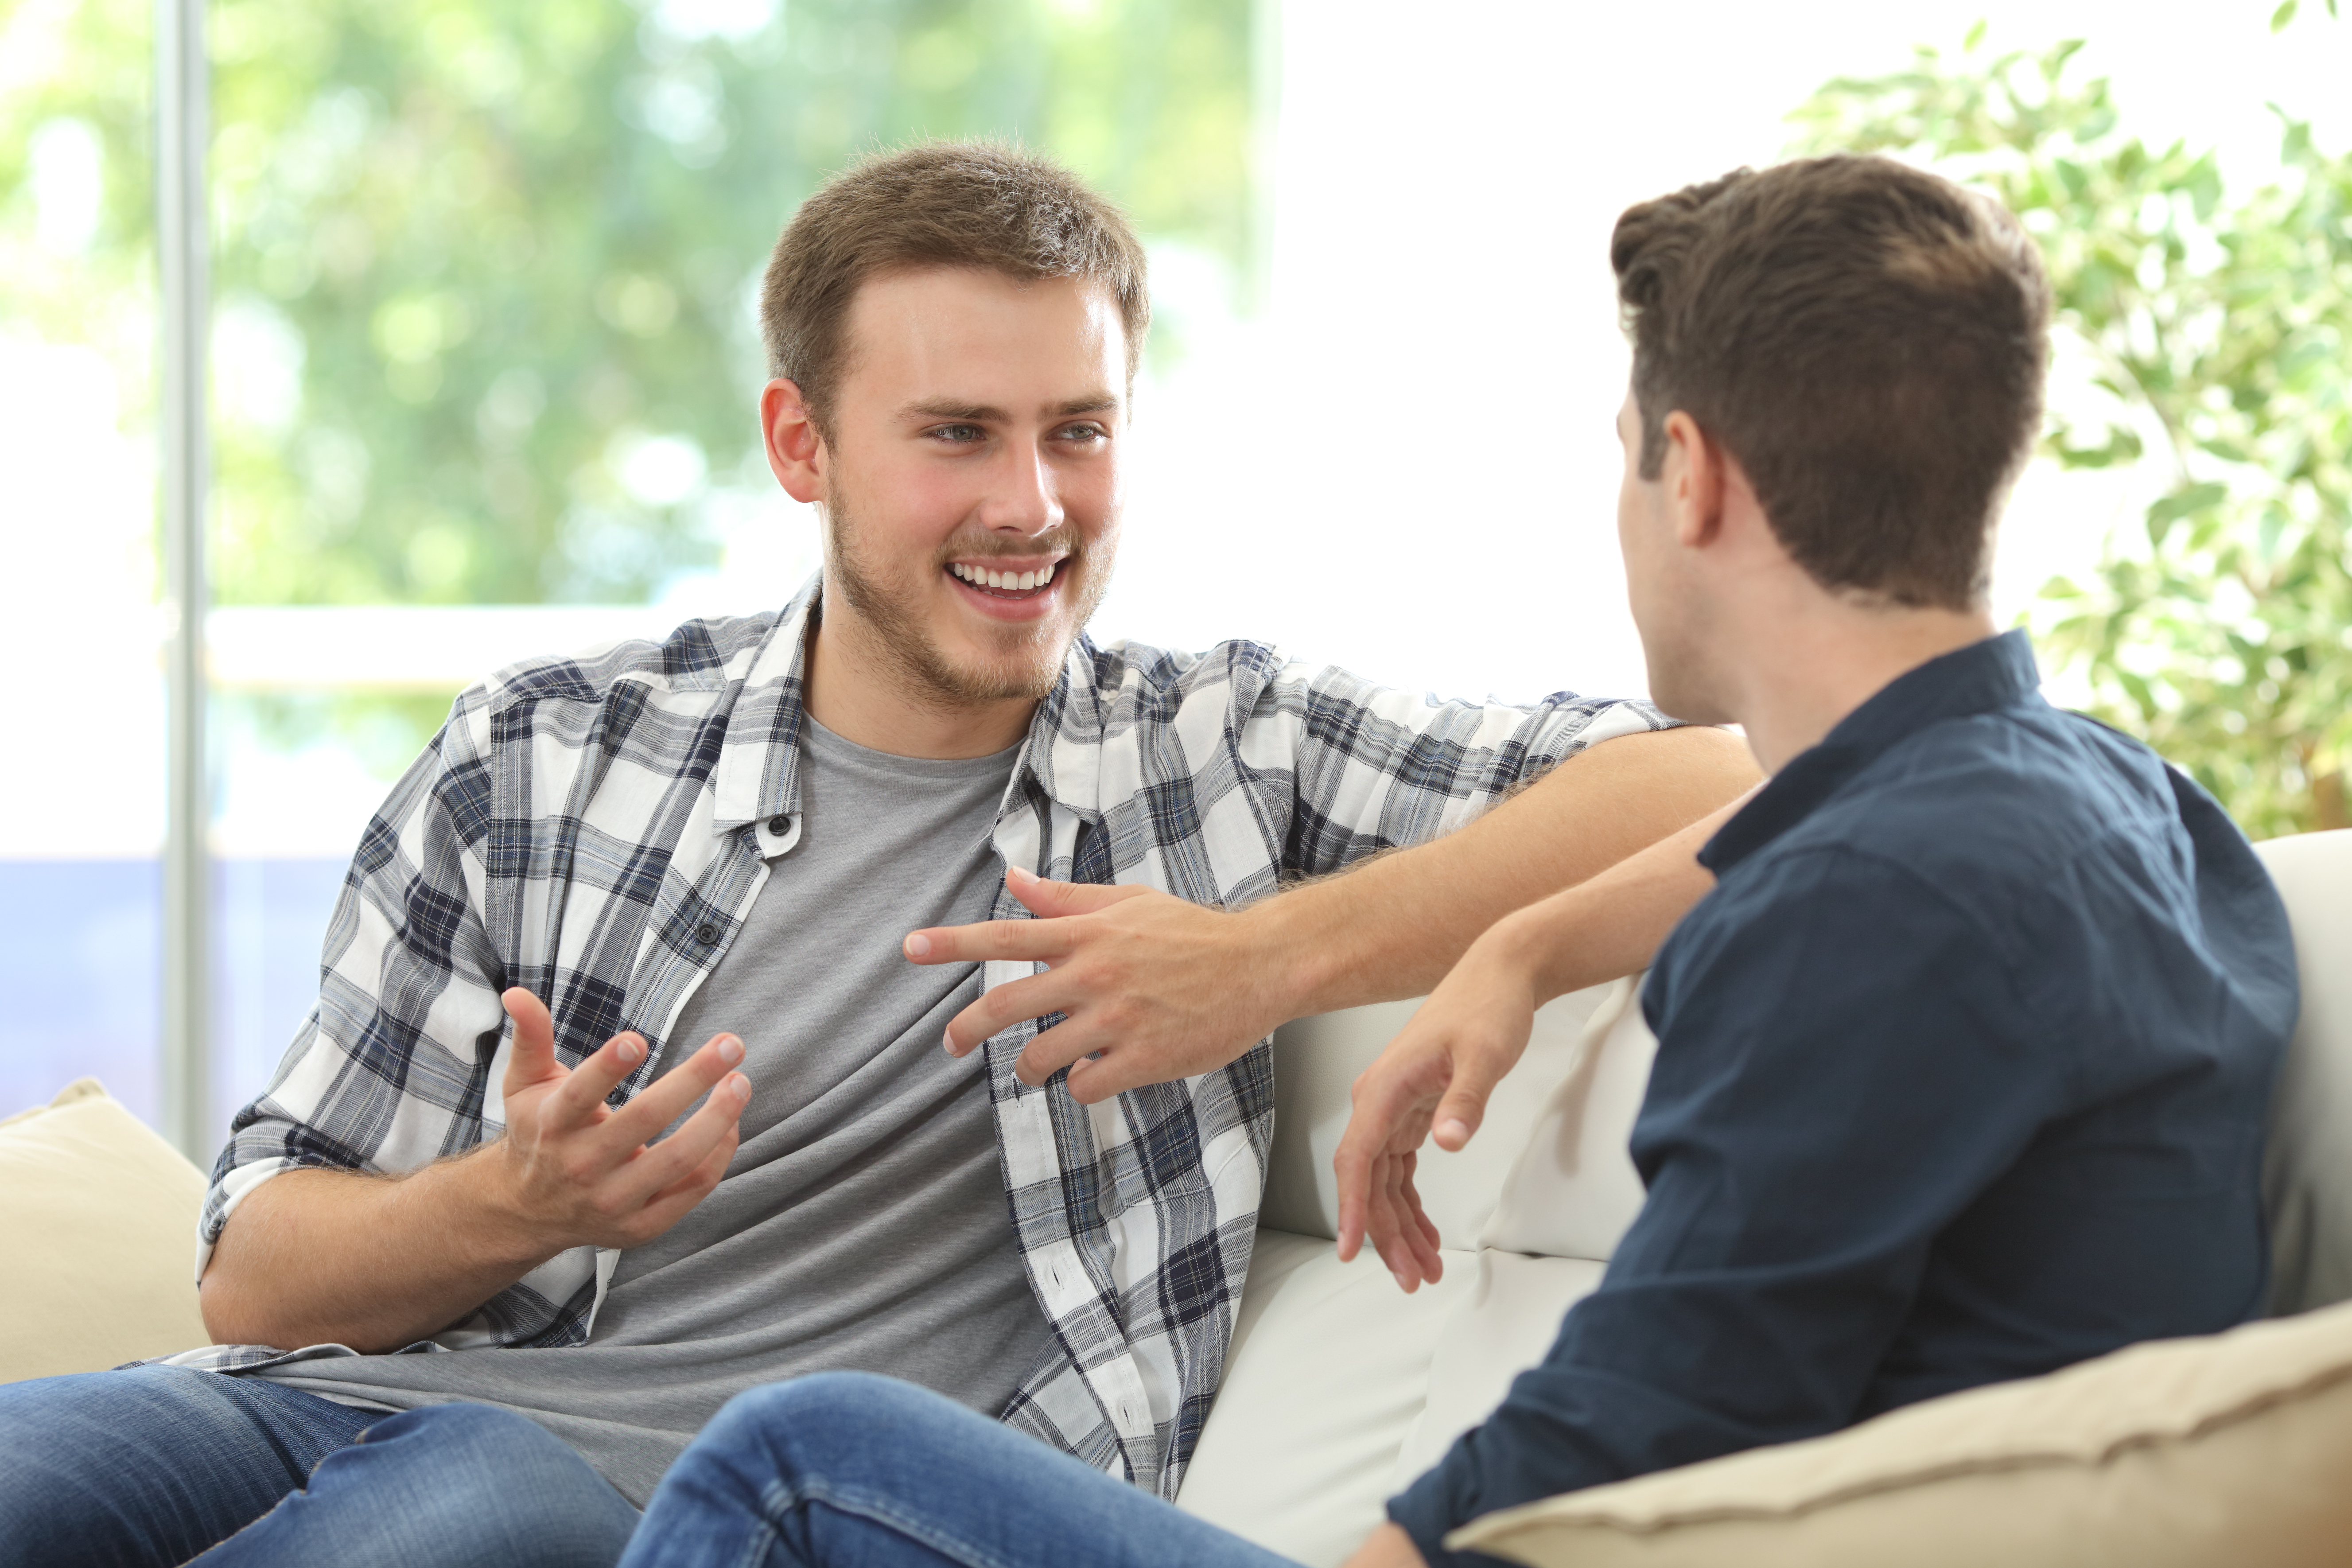 Two men talking to each other | Source: Shutterstock